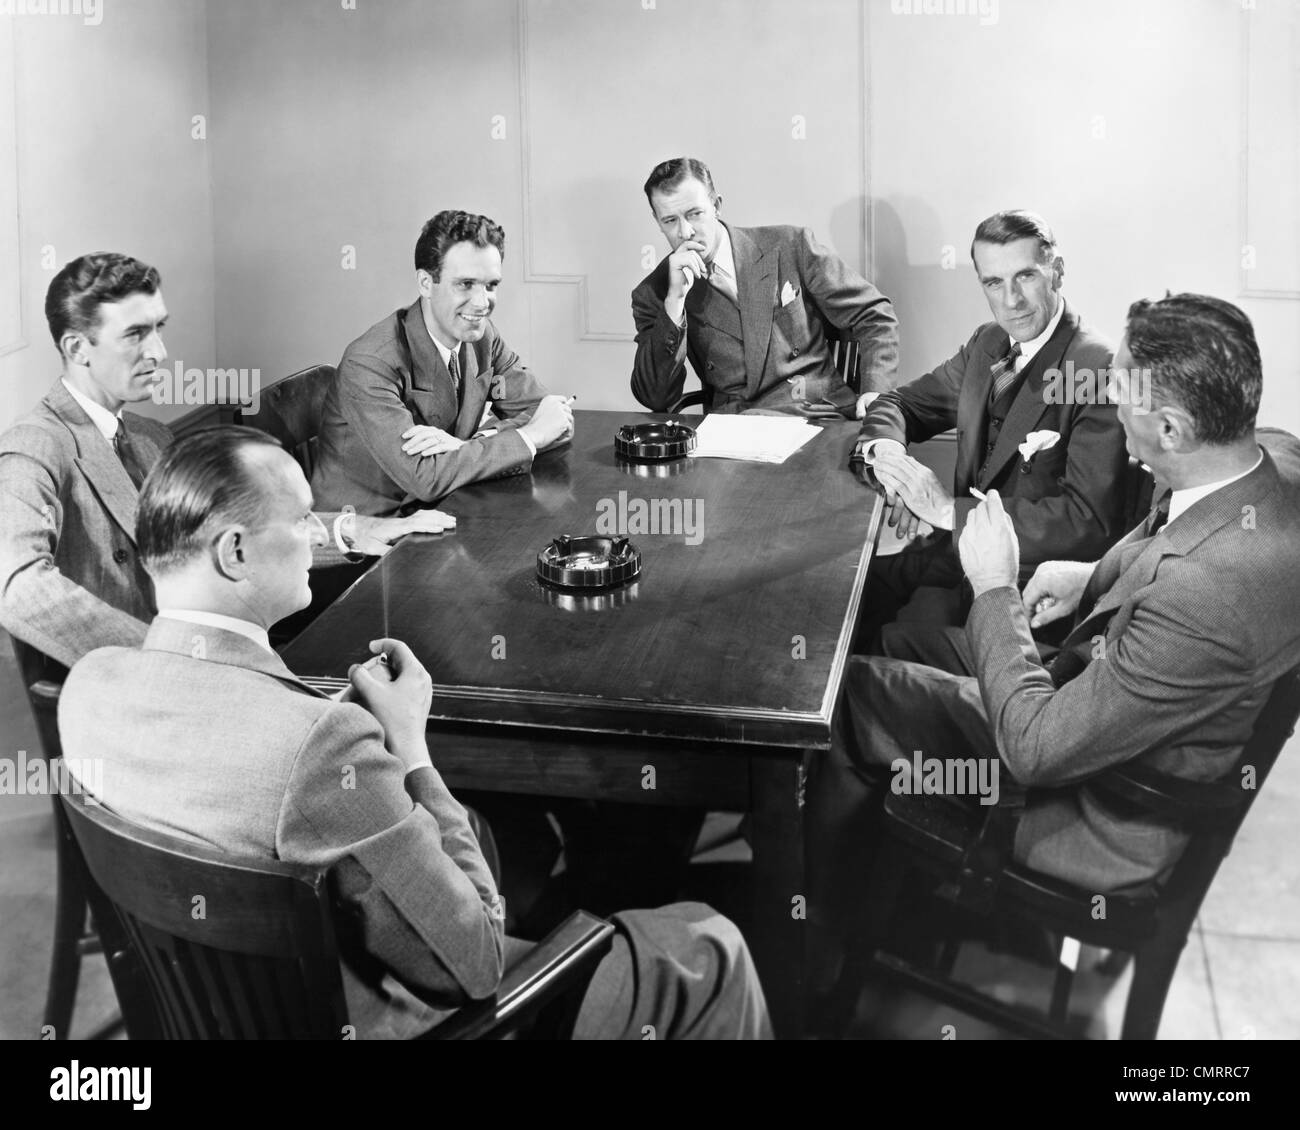 1930s 1940s 6 BUSINESSMEN MEETING IN BOARDROOM AROUND TABLE WITH ASHTRAYS Stock Photo